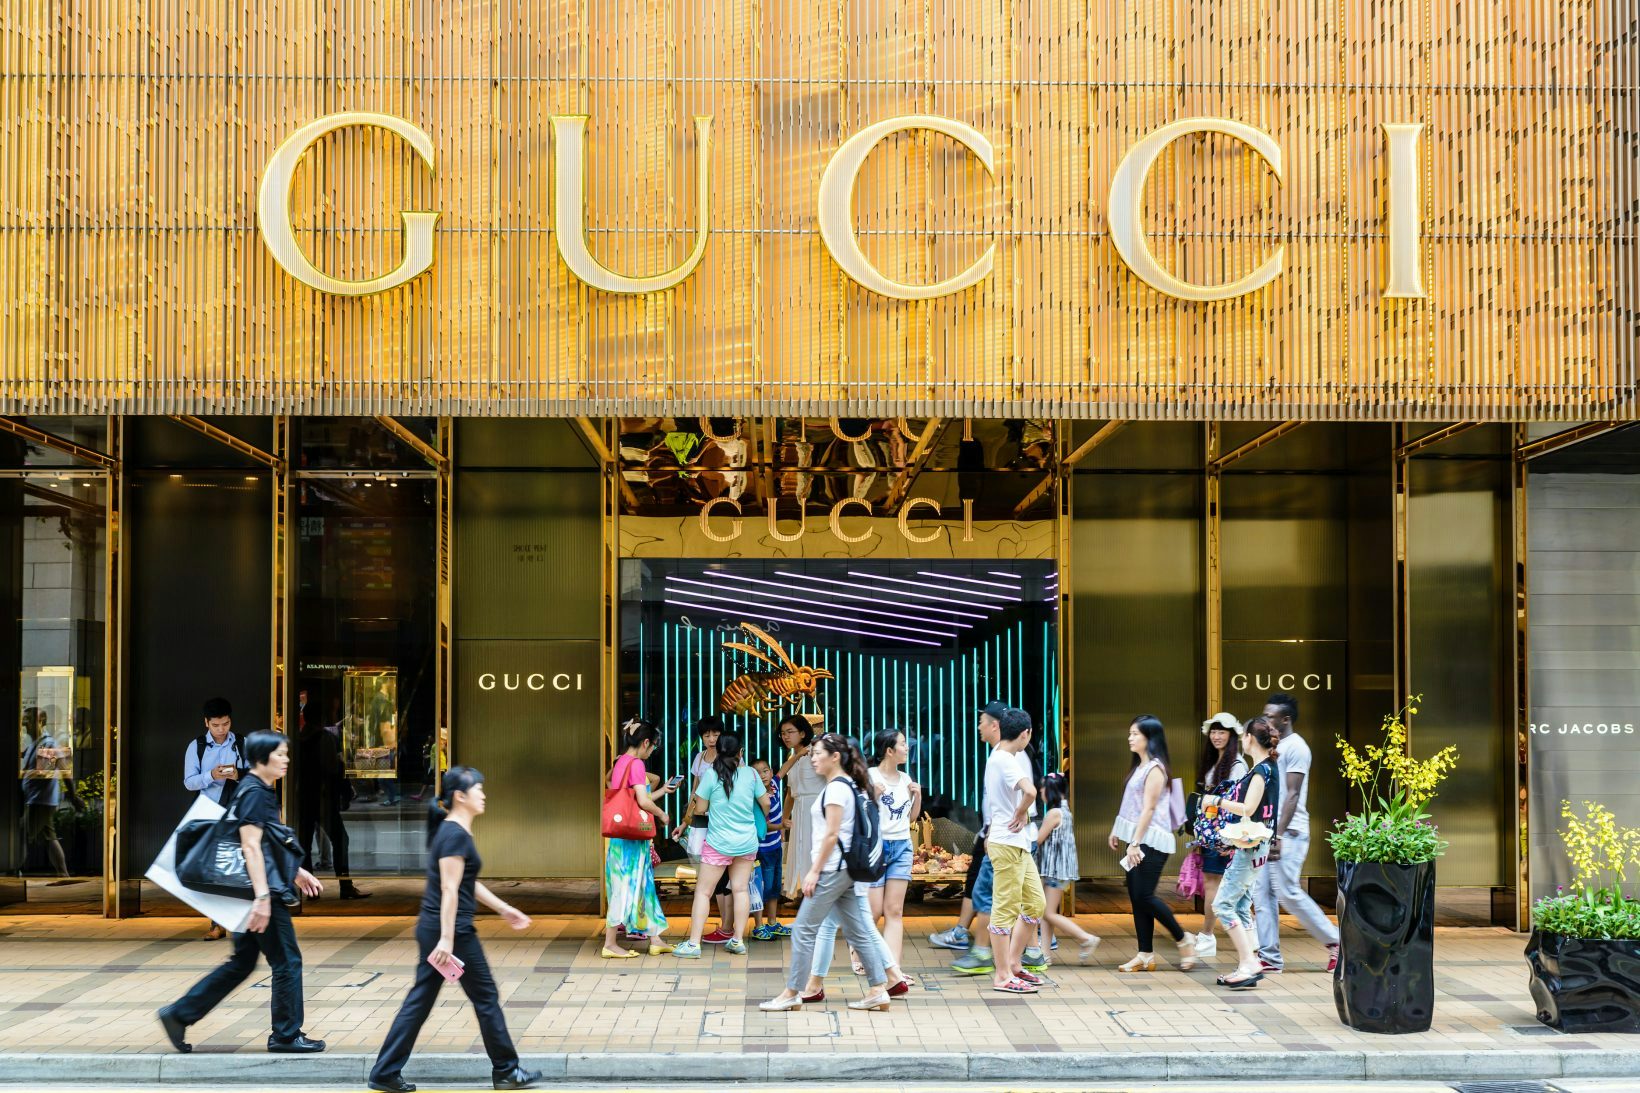 In China, the resale market (Daigou) is impacting luxury